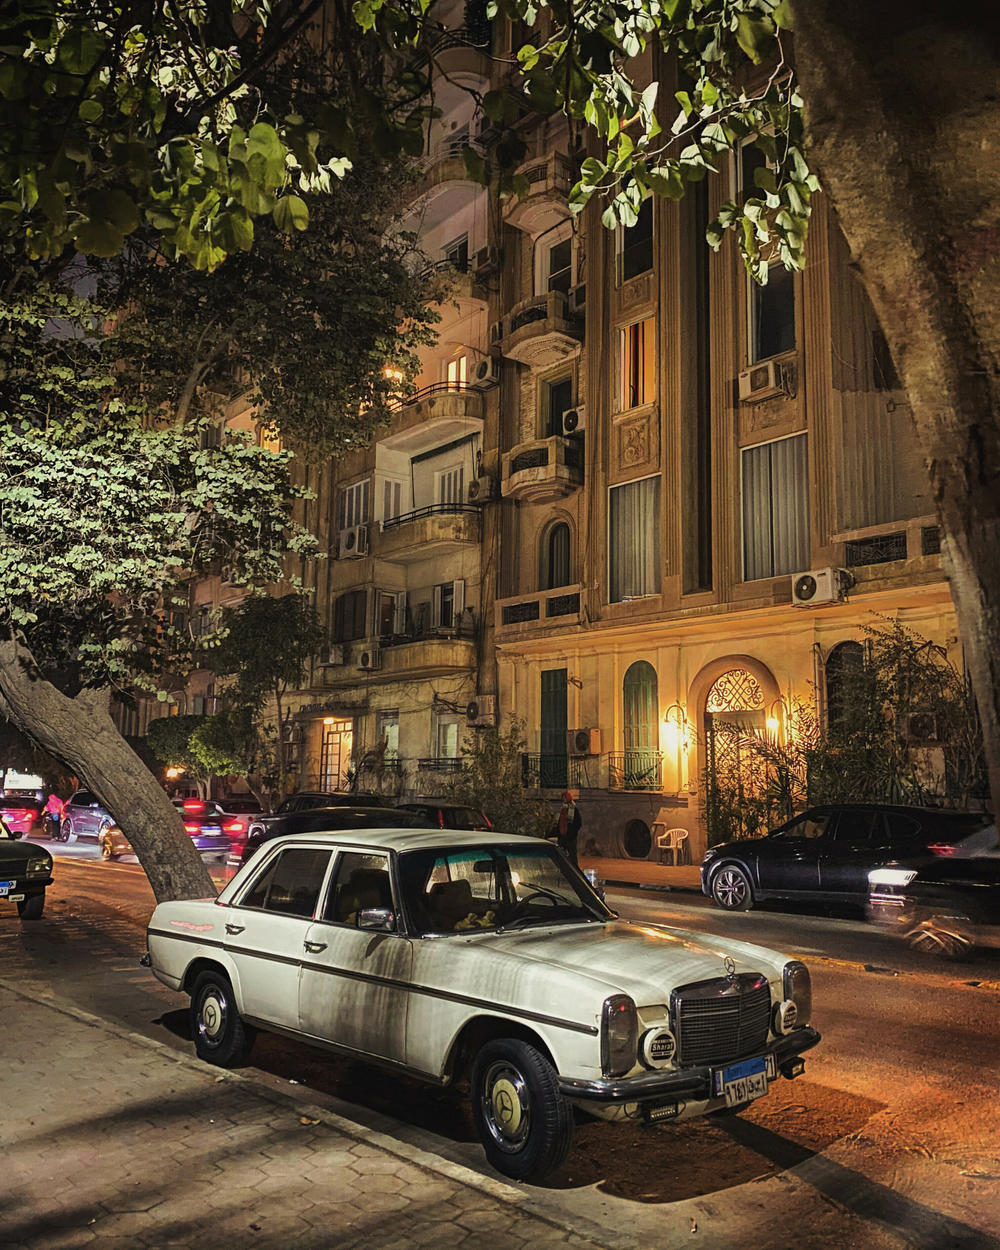 A classic Mercedes-Benz in front of an old building in Zamalek, Cairo. The scene was 